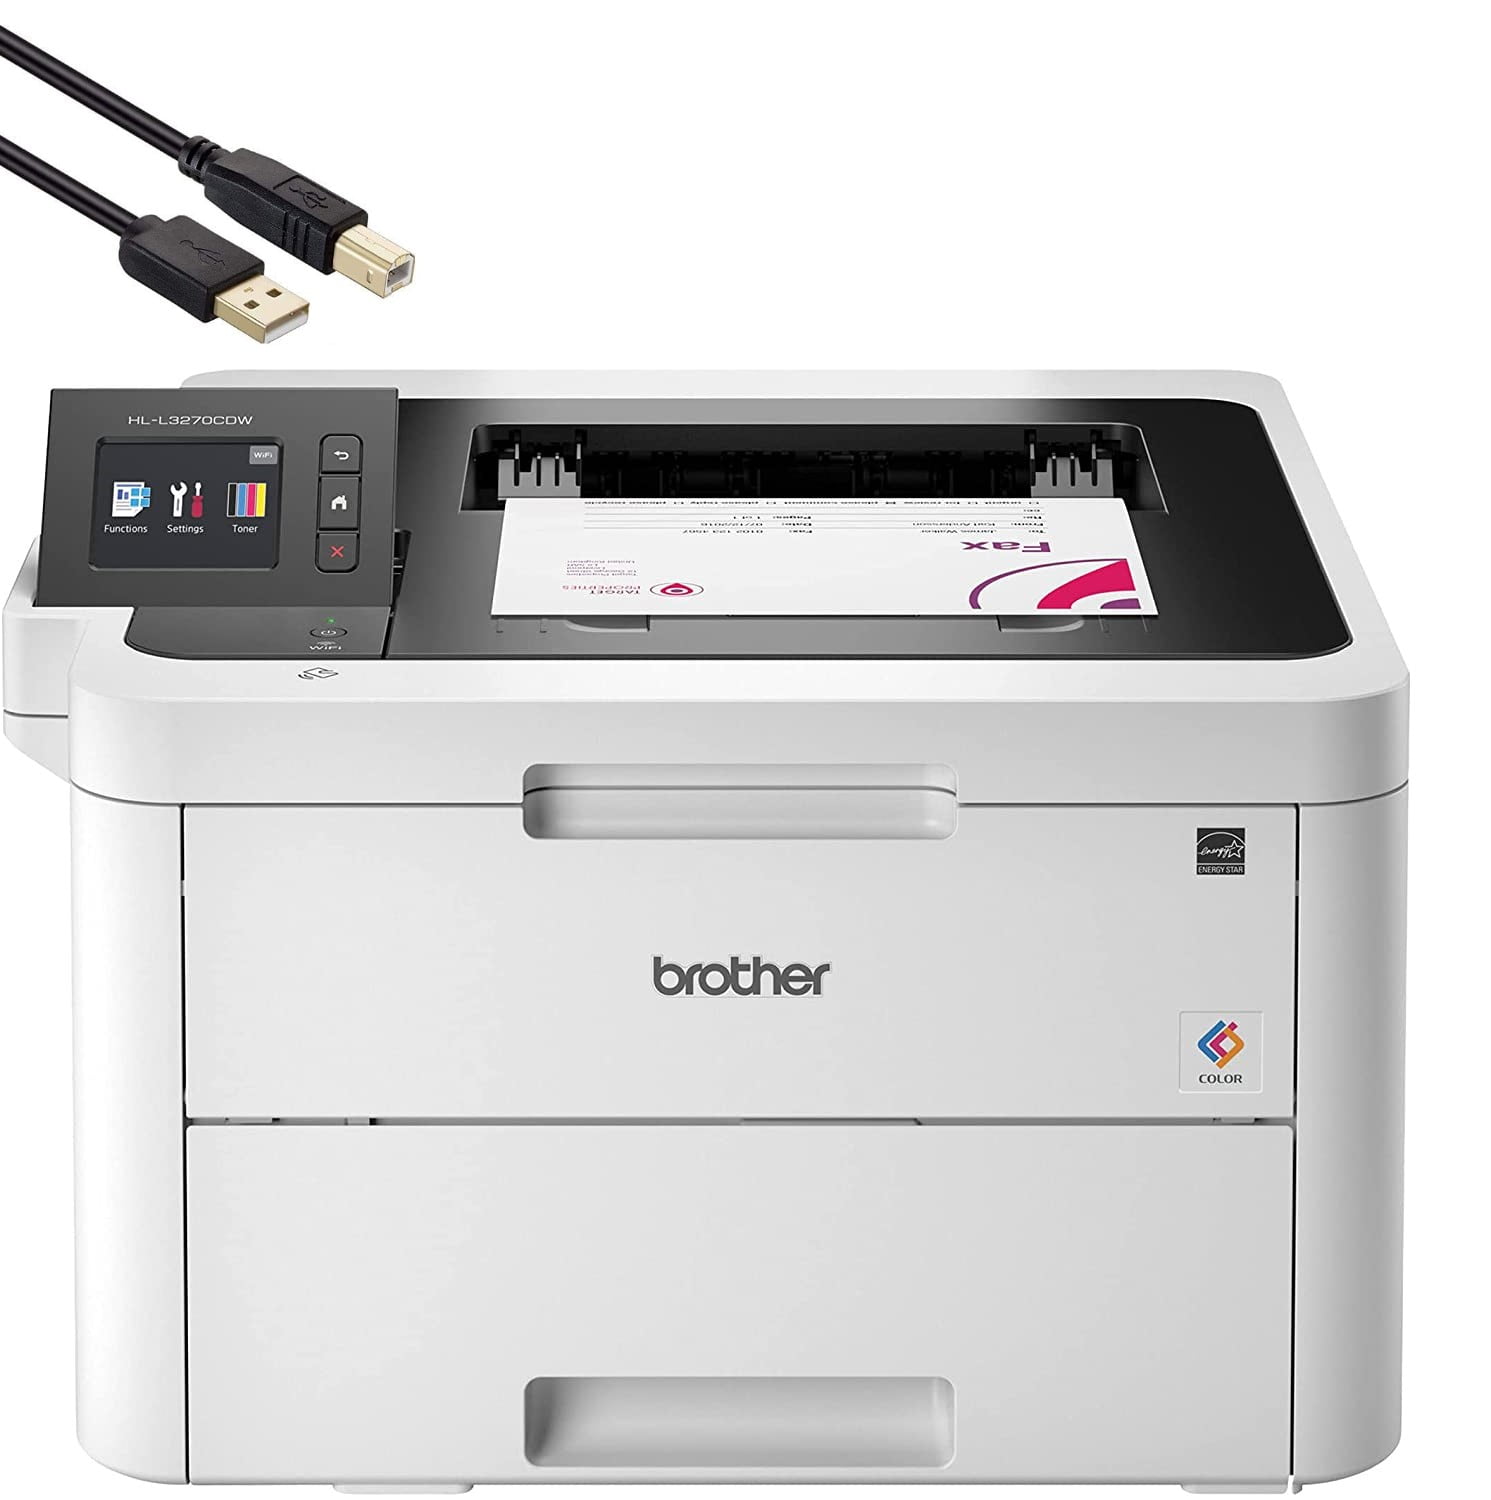 Brother HL-L3270CDW Compact Wireless Digital Color Laser Printer with NFC for Home Office Single-Function: Print - 2.7" Touchscreen, Auto Duplex Print, 25ppm, 250 Sheet,4 Feet USB PrinterCable - Walmart.com